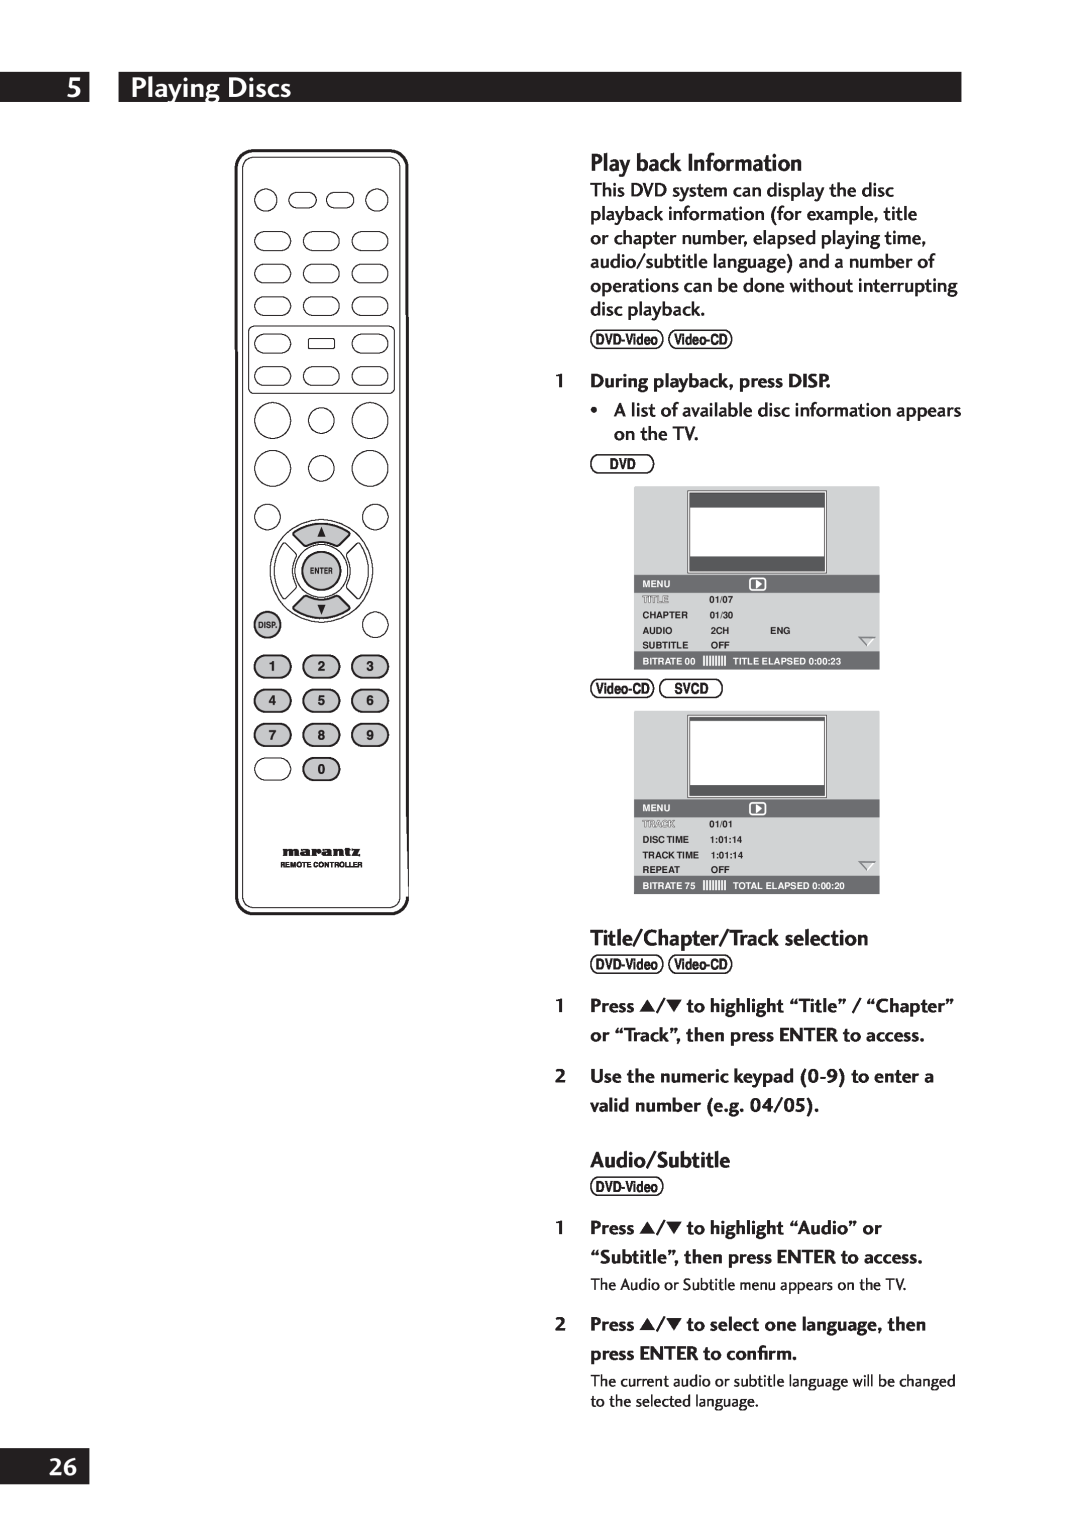 Marantz DV7001 manual Play back Information, Title/Chapter/Track selection, Audio/Subtitle, During playback, press DISP 